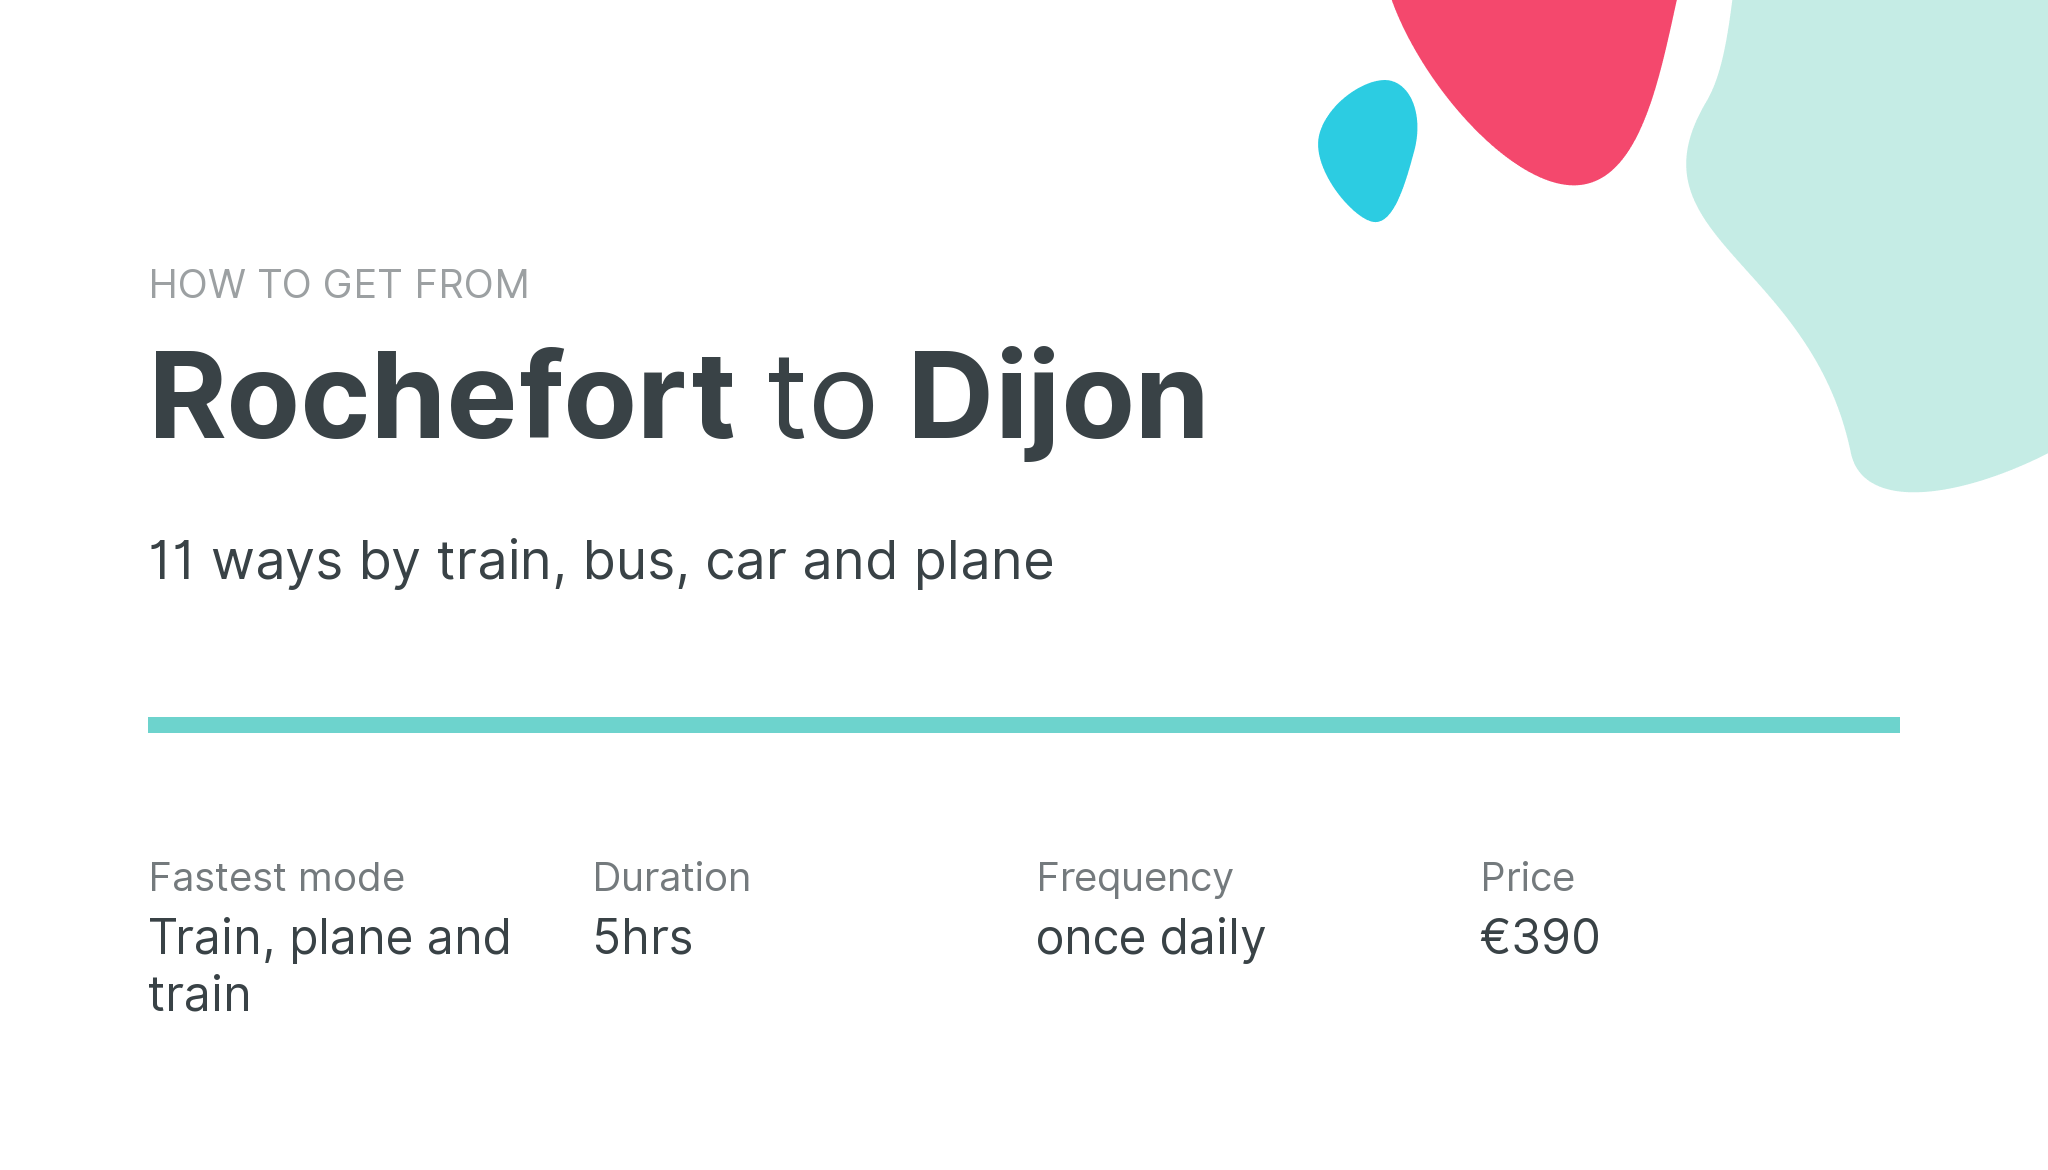 How do I get from Rochefort to Dijon